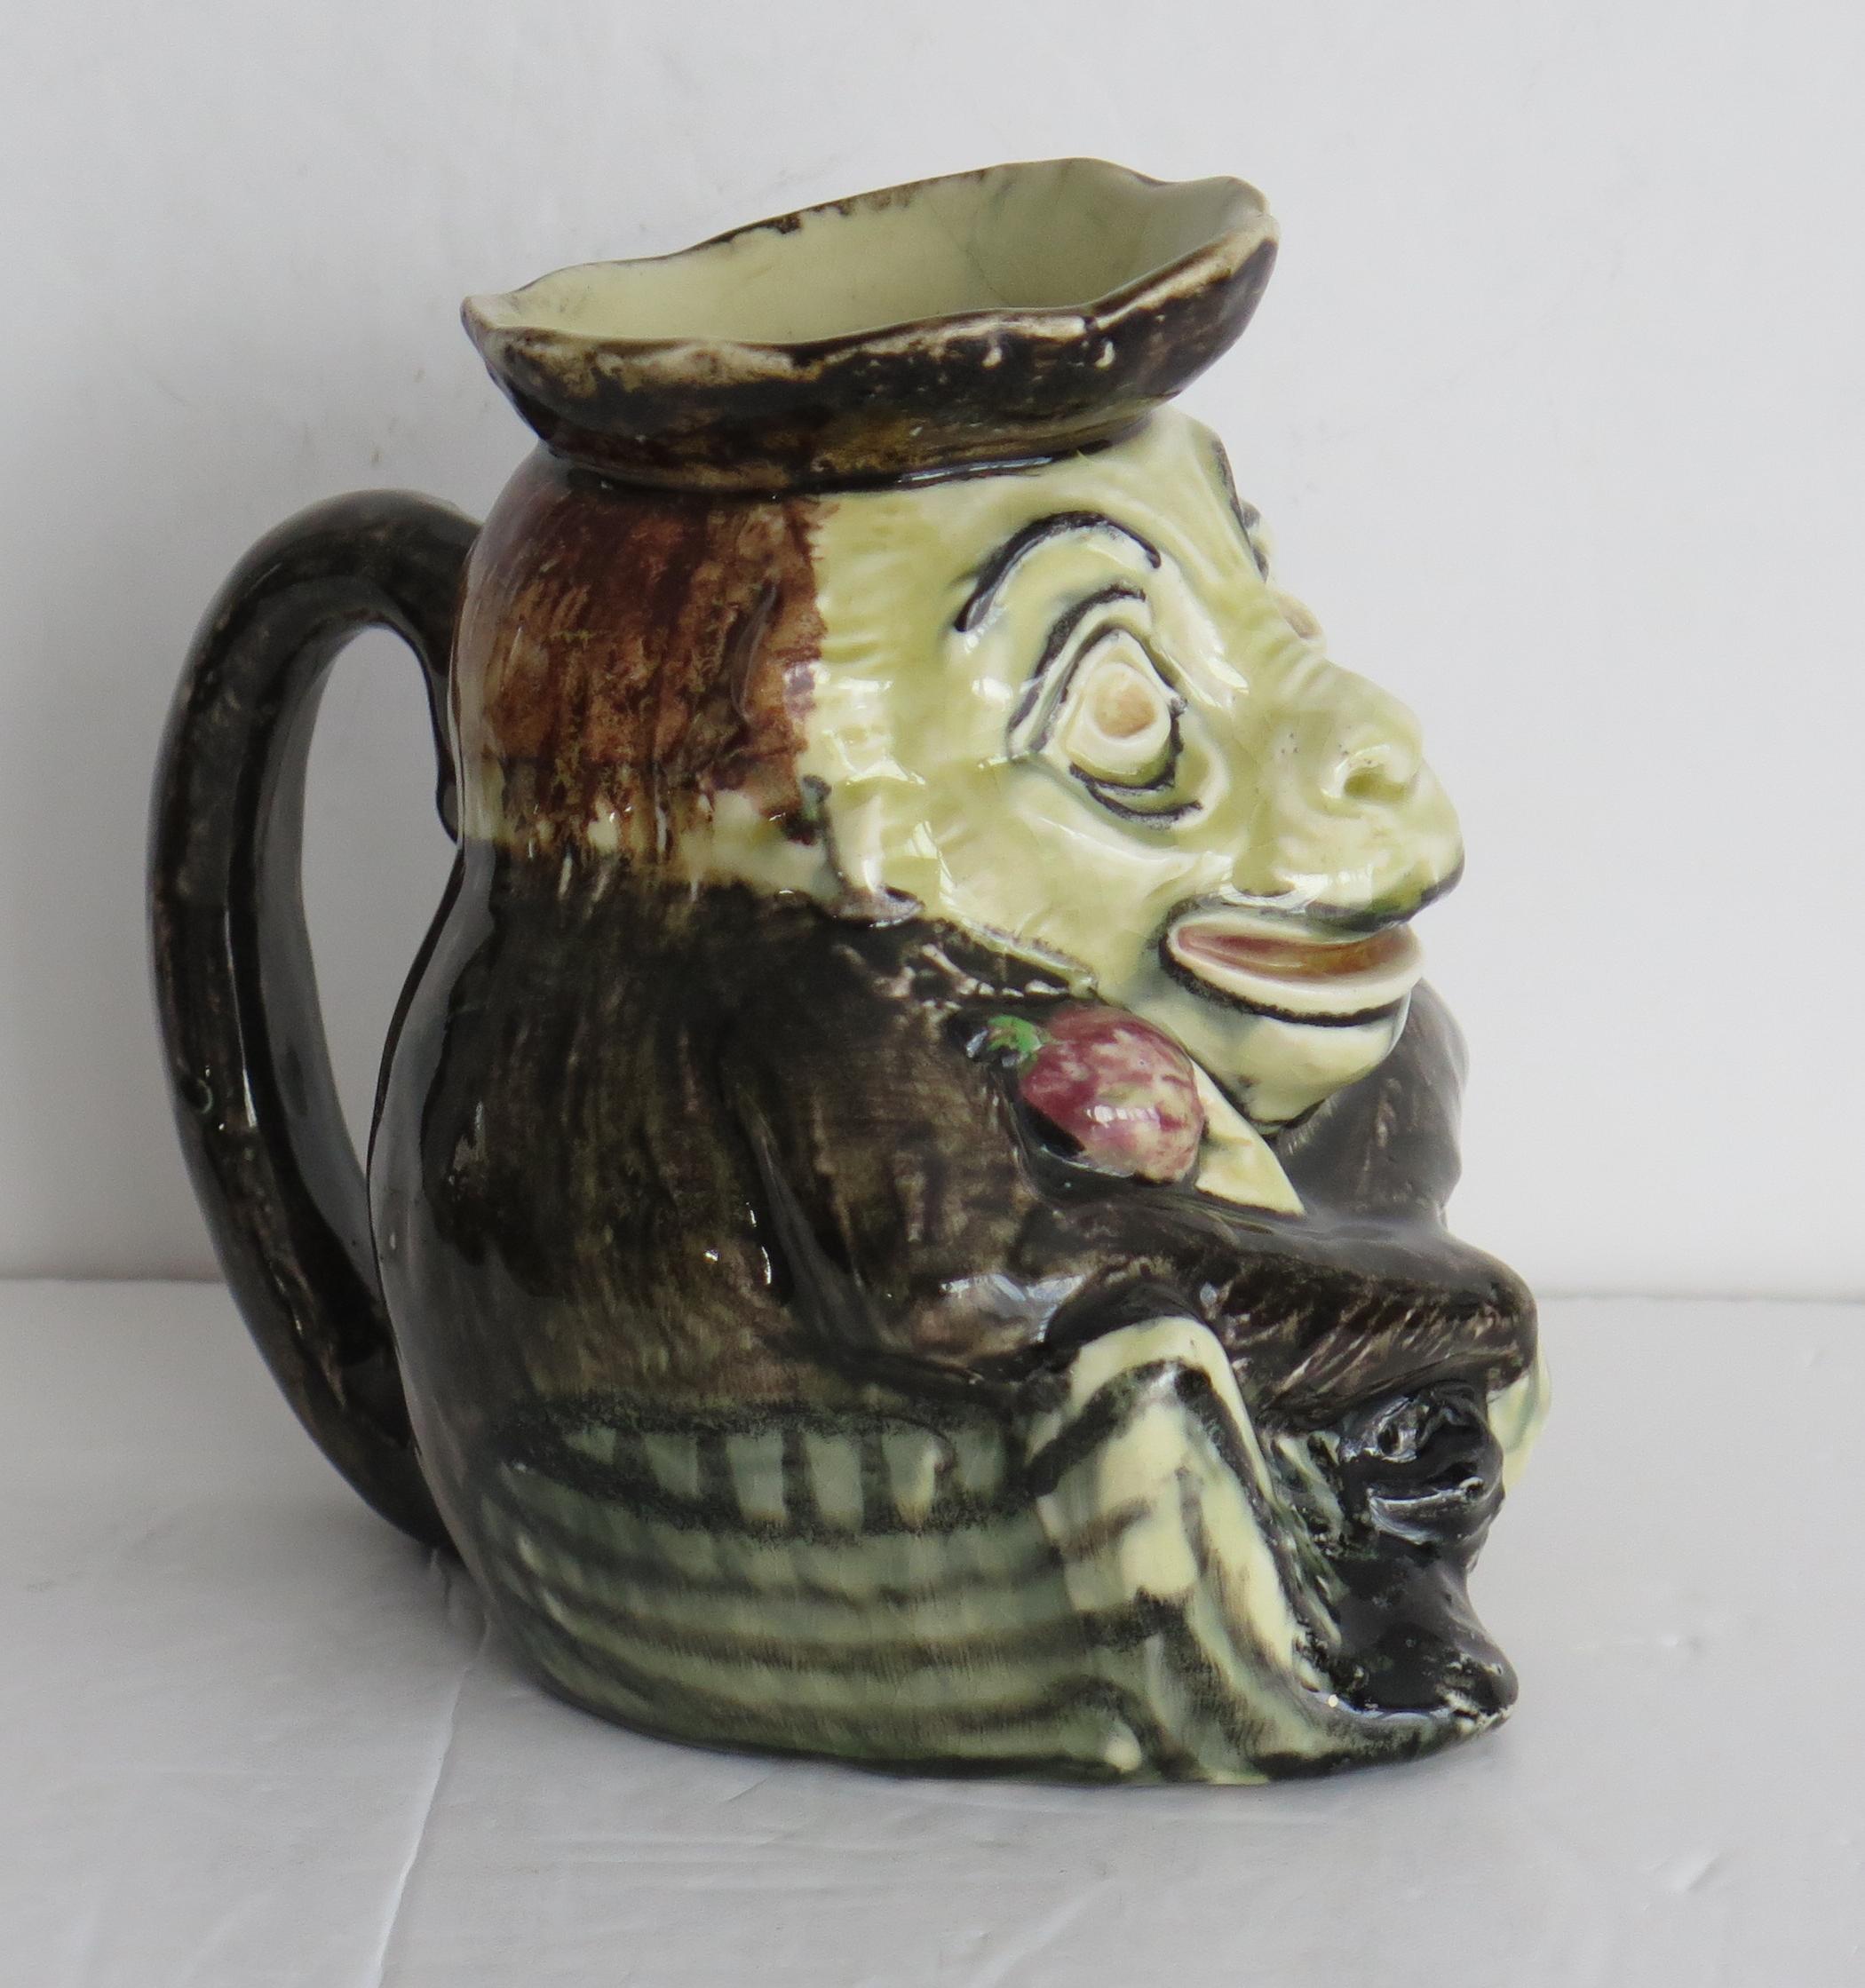 This is a very interesting Pottery Jug of a grotesque Imp or figure holding an apple. 

The jug is well potted in the shape of a grotesque Imp with a loop handle.

The jug is all hand painted with bold coloured enamels.

It has no markings